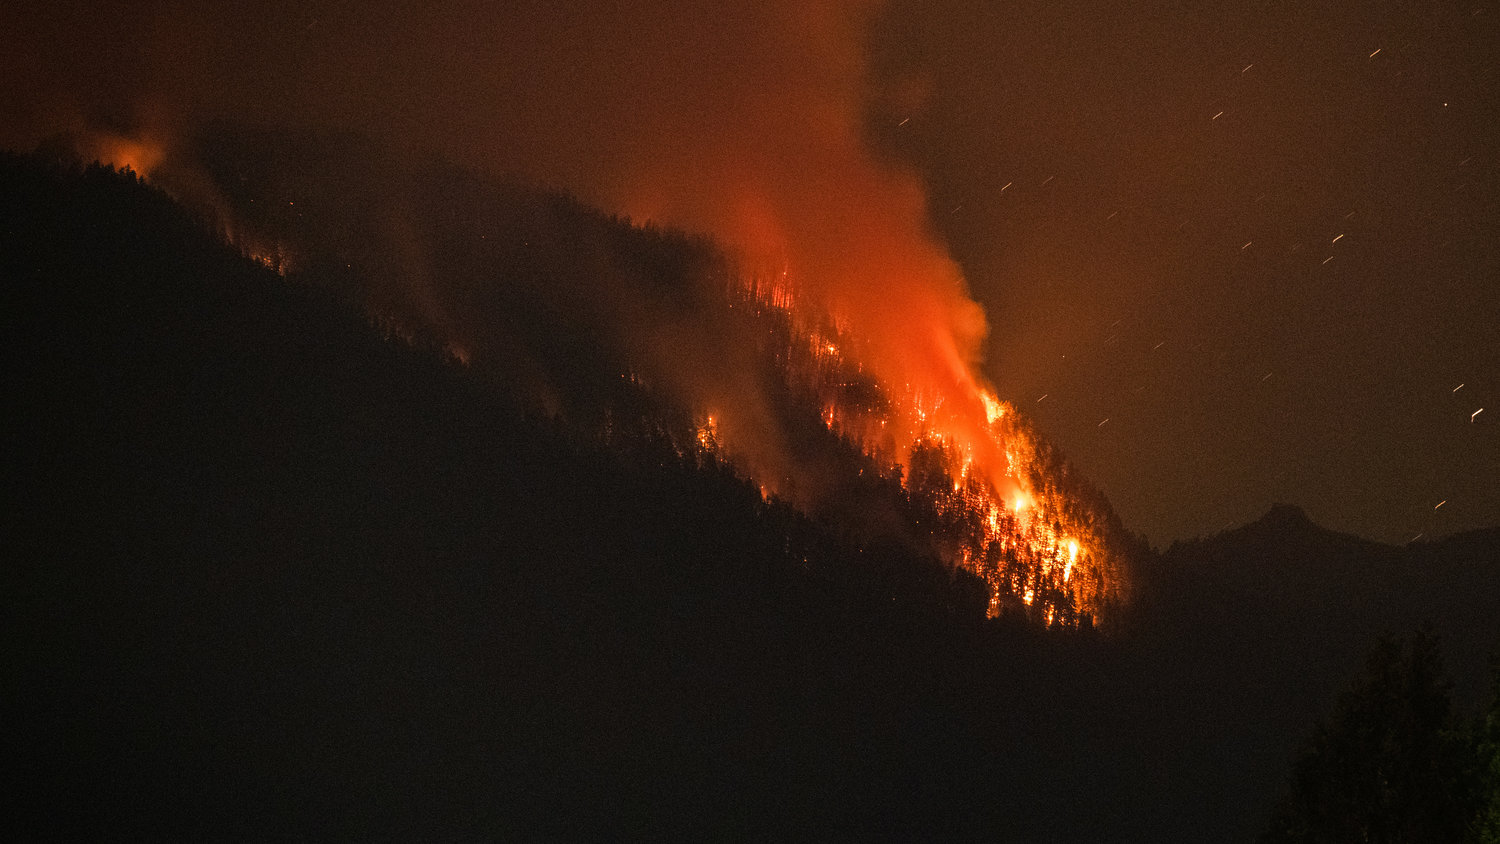 Flames from the Goat Rocks Fire ignite trees earlier this month as seen from Cannon Road in Packwood over Butler Creek.